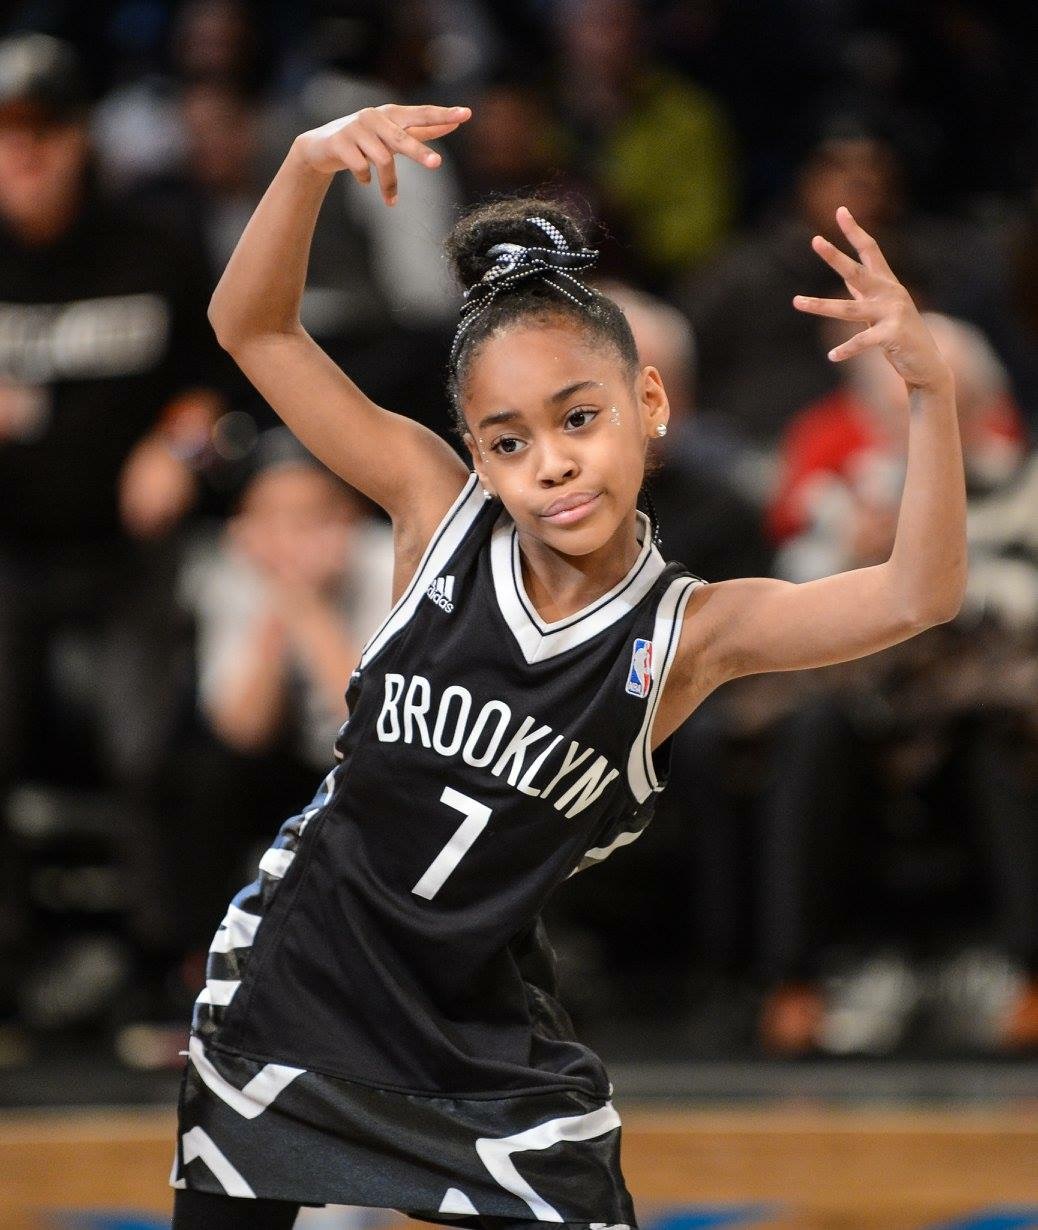 Brooklyn Nets Kid Dancers Are Looking For A Select Few To Join Their Team